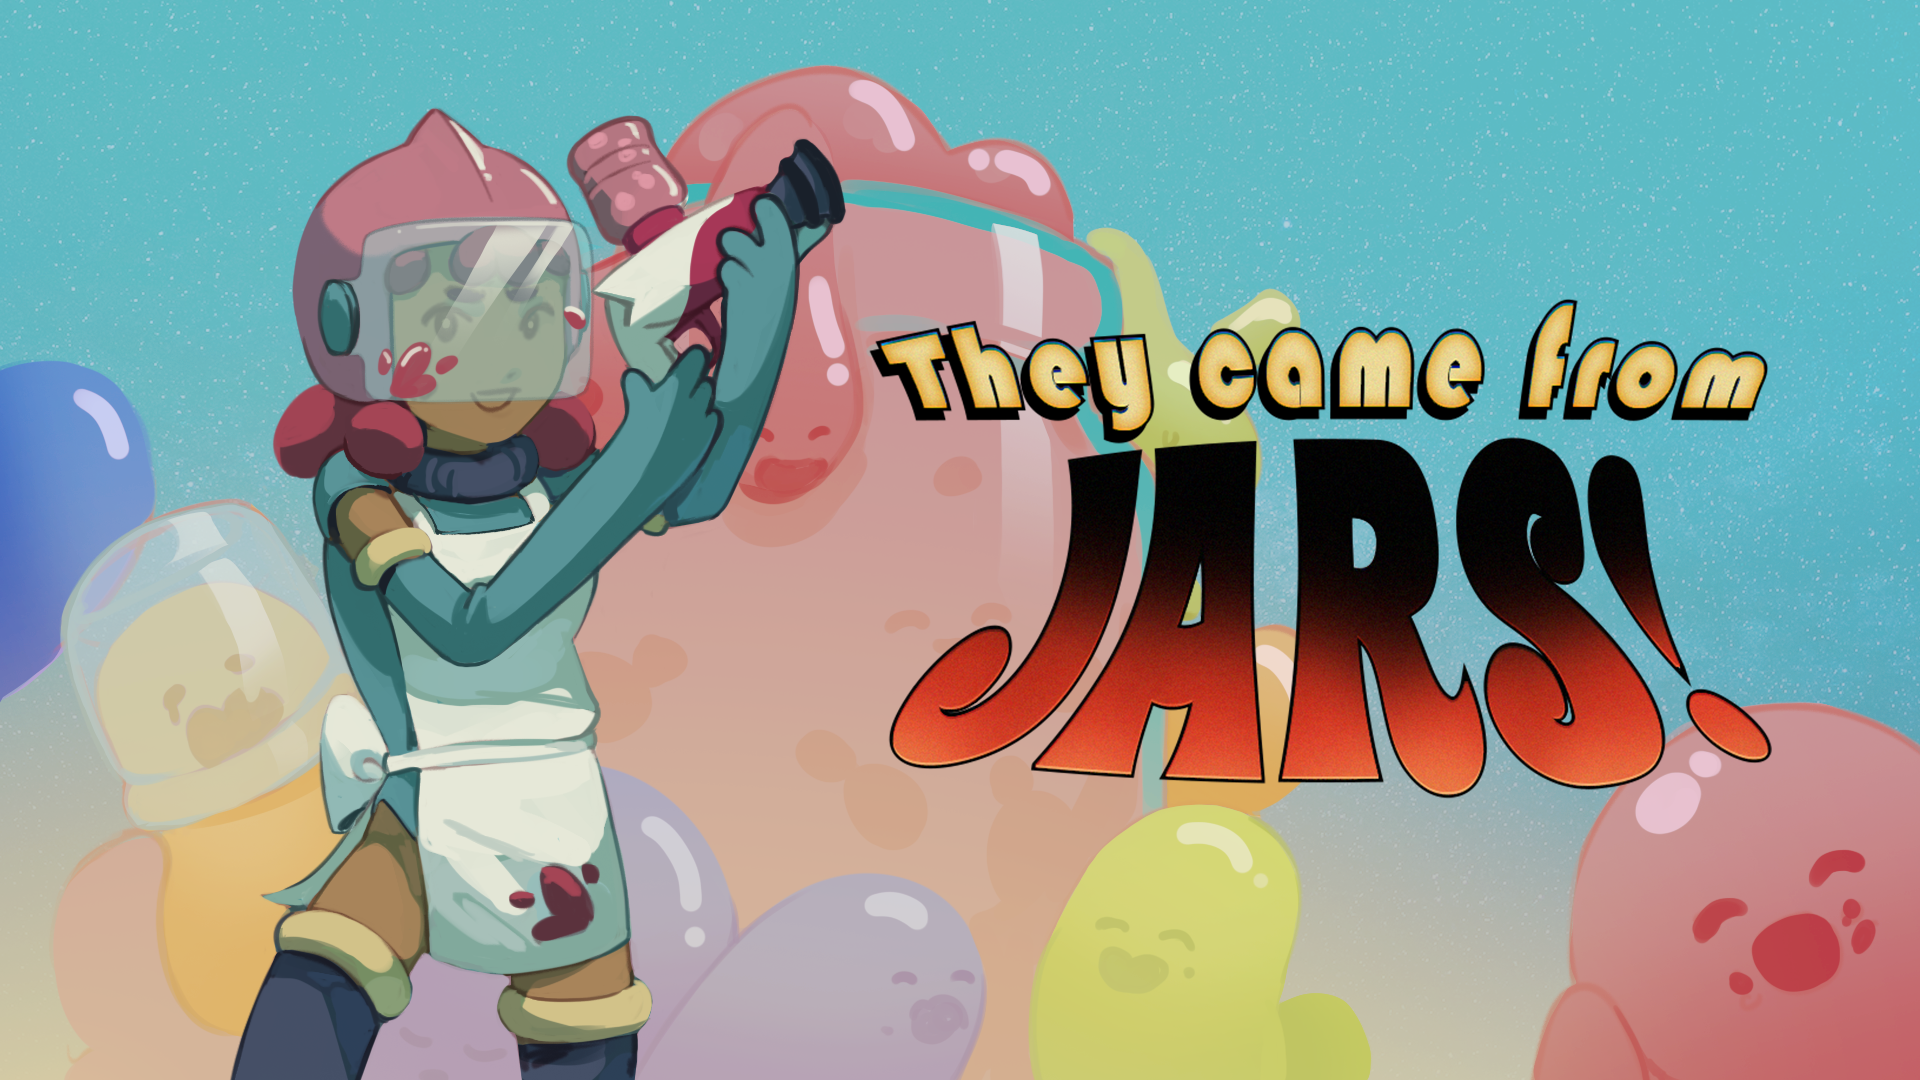 They Came From Jars!